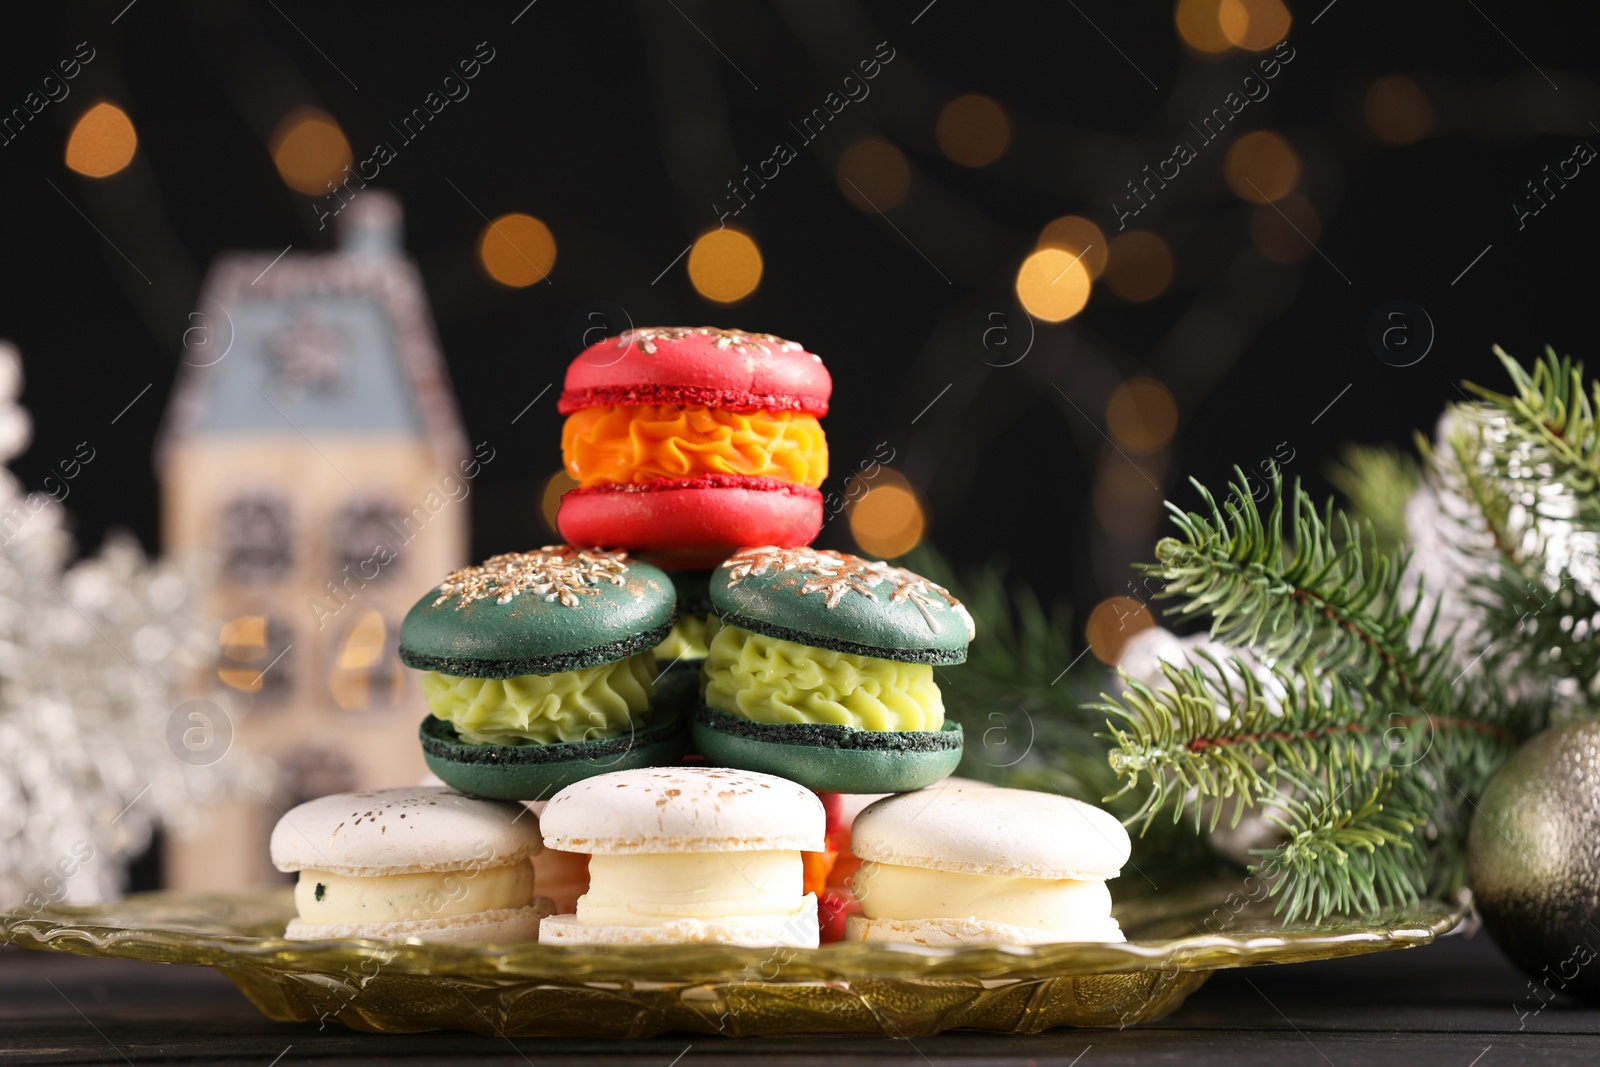 Photo of Beautifully decorated Christmas macarons and fir branches against blurred lights